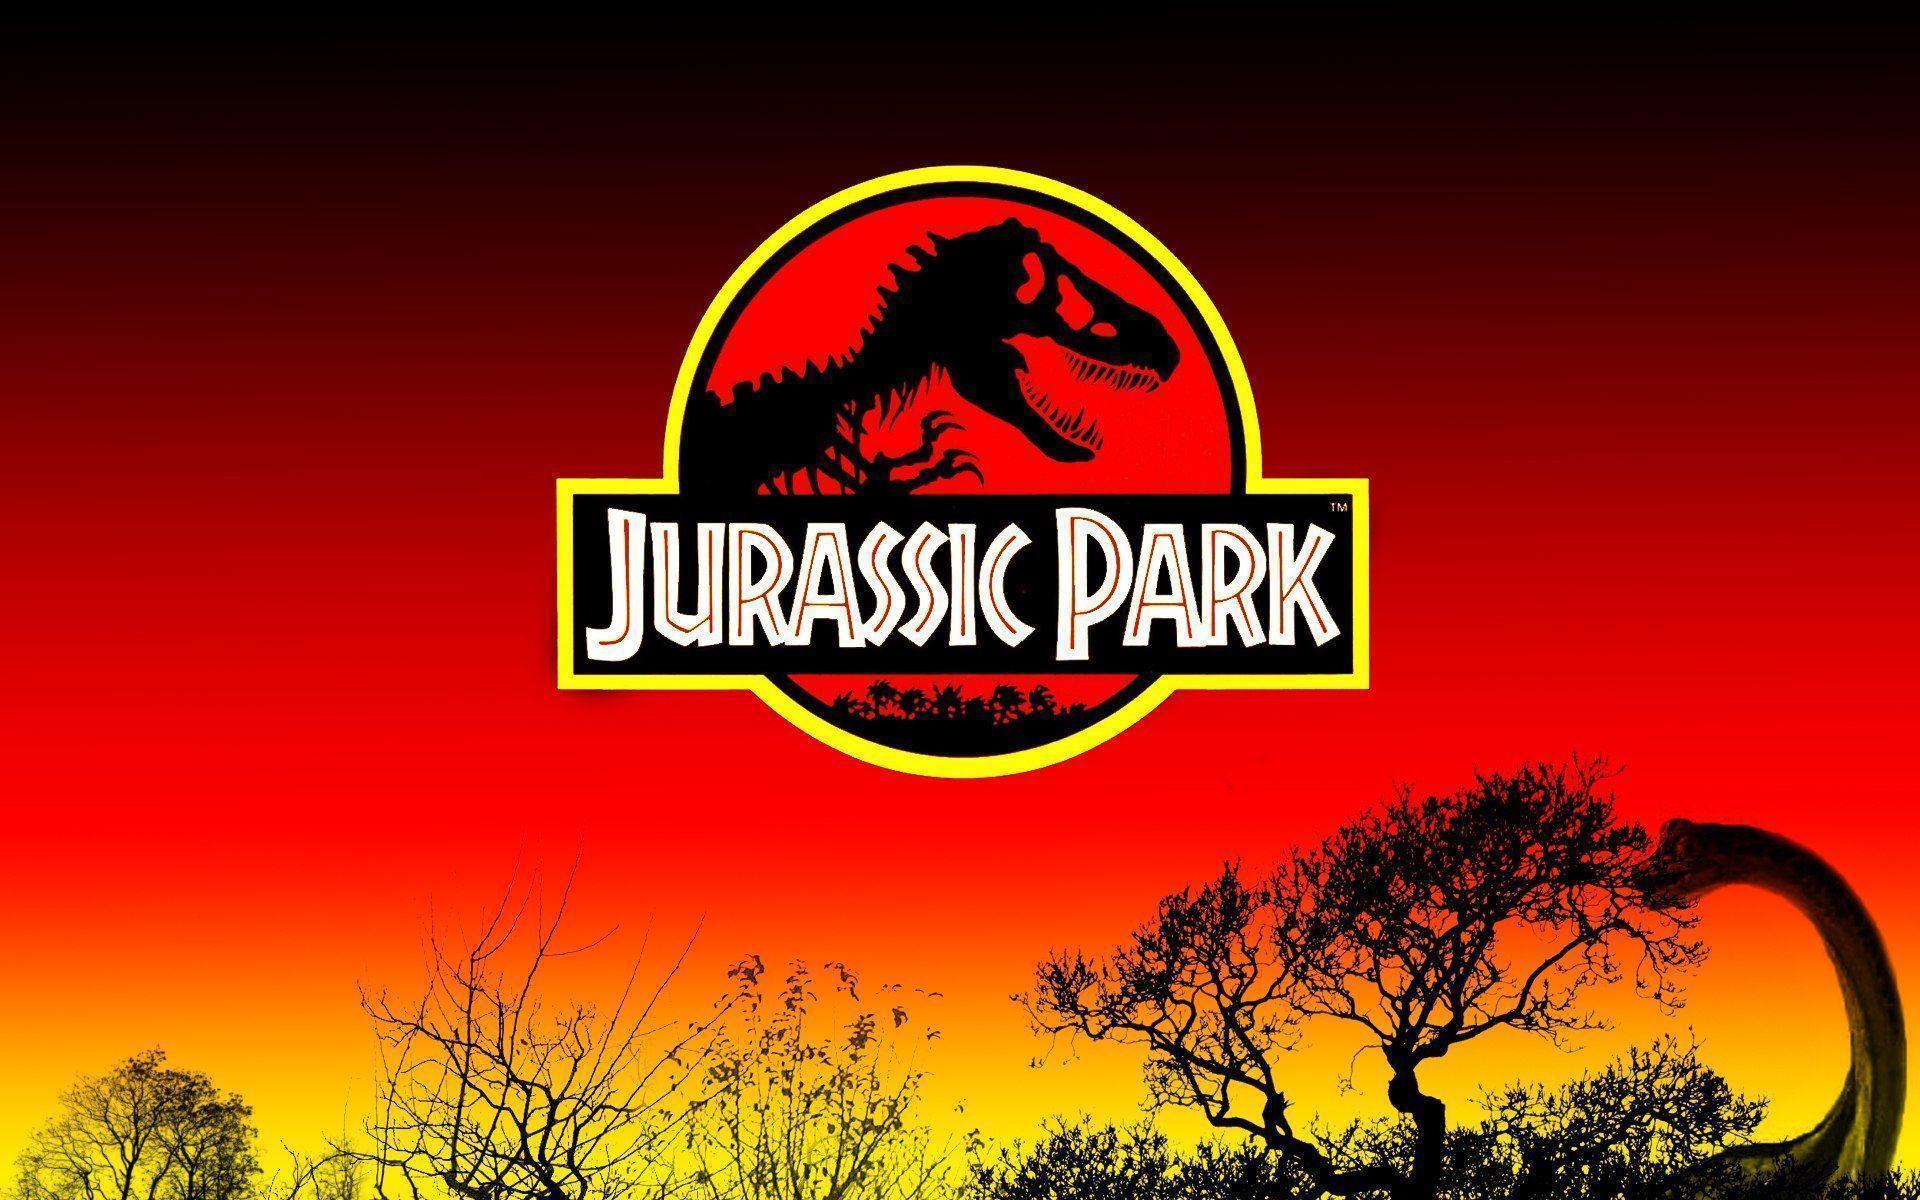 Jurassic Park Wallpapers - Top Free